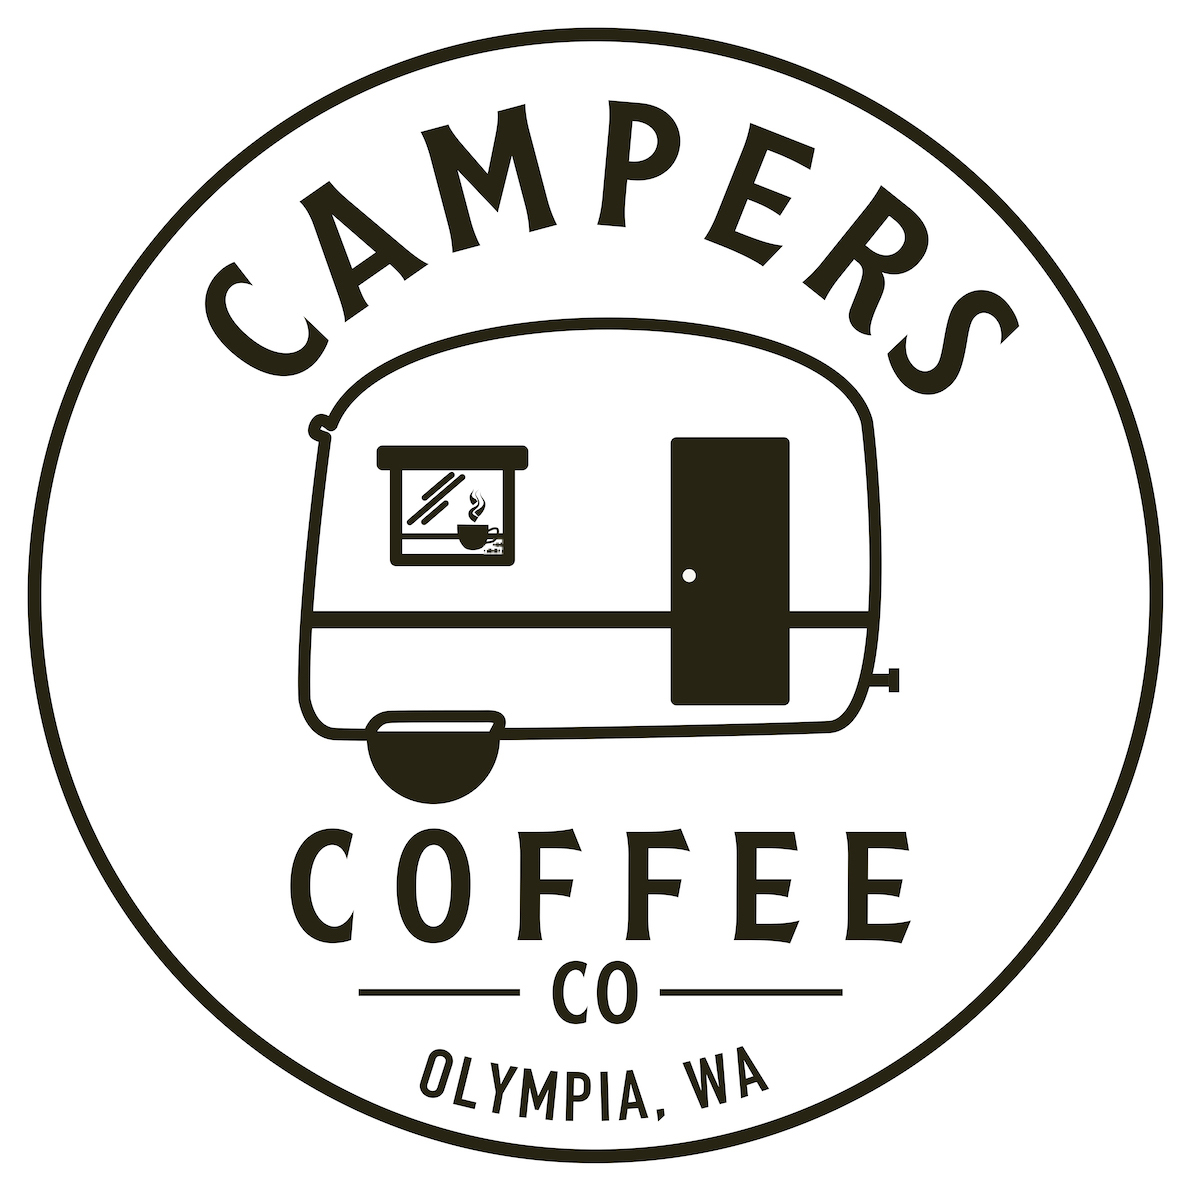 Campers Coffee Co LLC